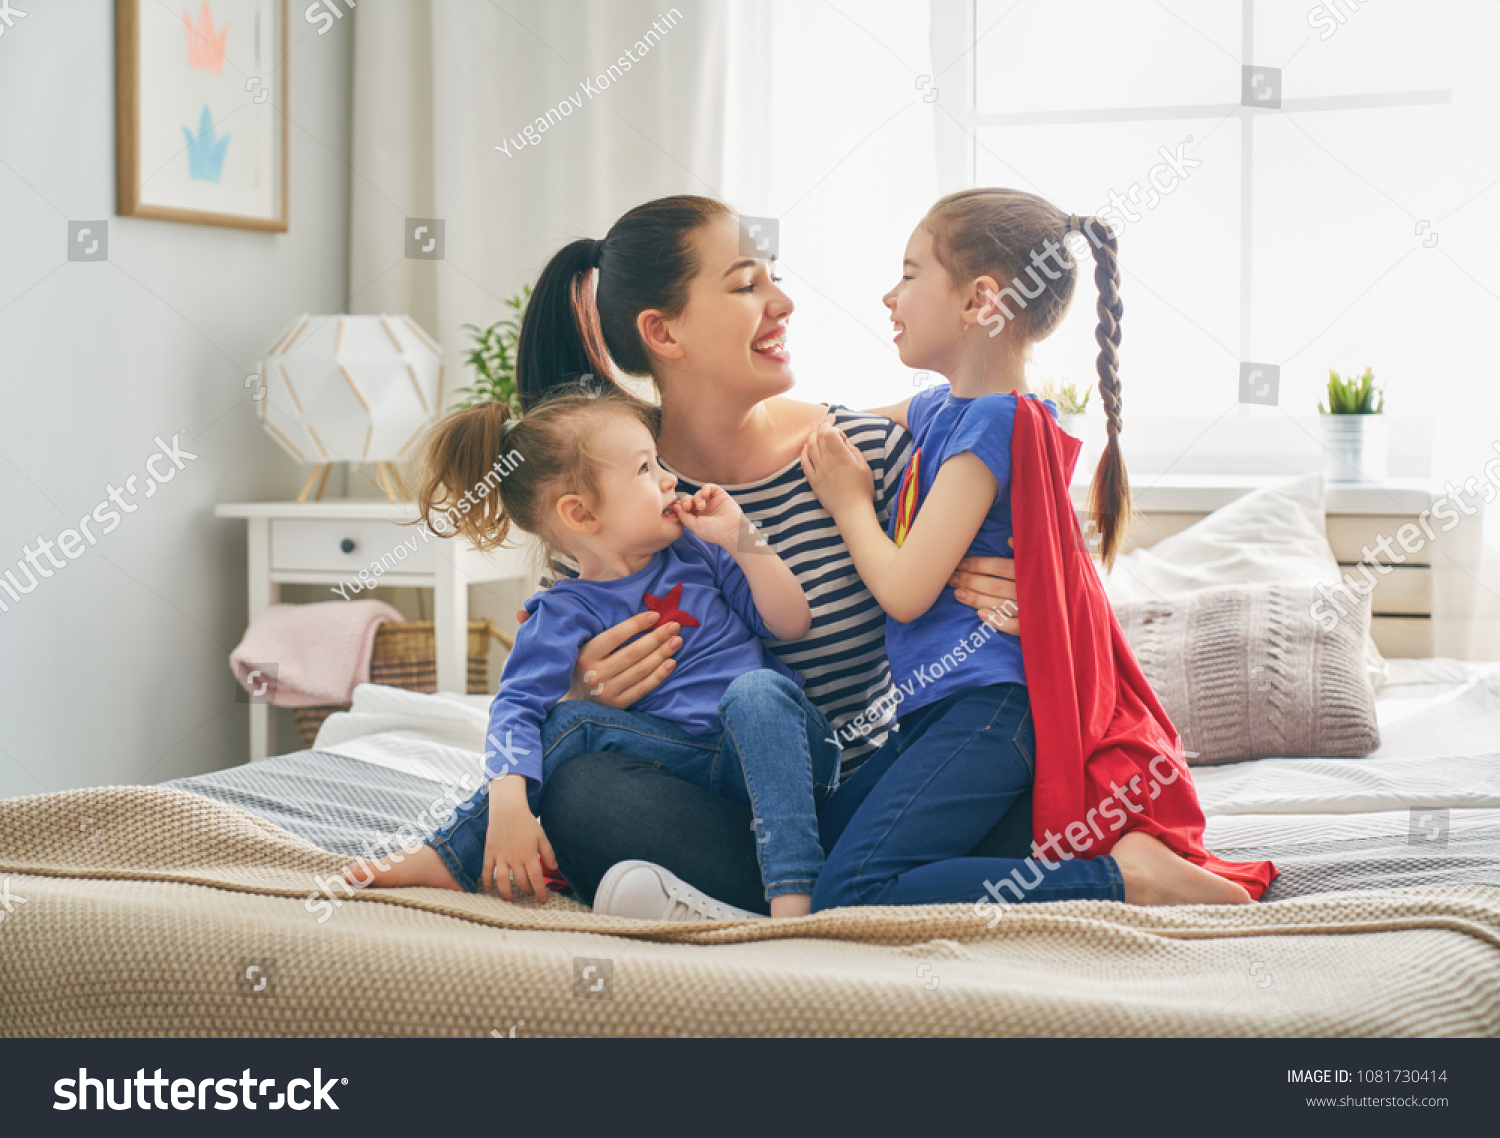 Mother and her children playing together. Mom and girls in Superhero costumes. Mum and kids having fun, smiling and hugging. Family holiday and togetherness. #1081730414